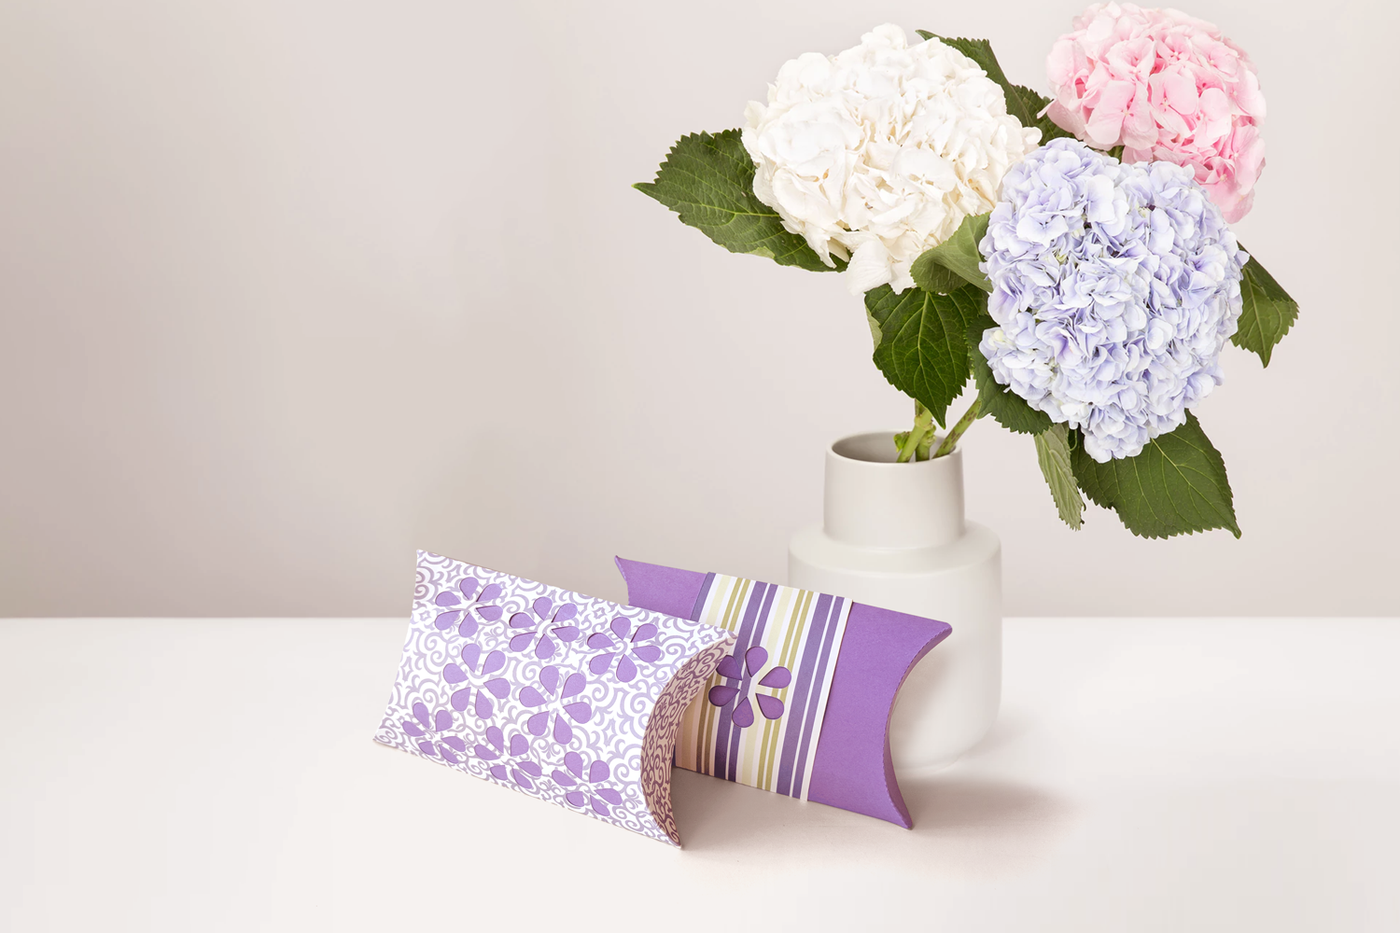 Two pillow boxes in front of a vase of hydrangeas. The front box has a purple and white swirl pattern with flower cutouts to reveal purple paper. The back one is purple with a purple, green, ivory,and white striped band with a flower cutout.